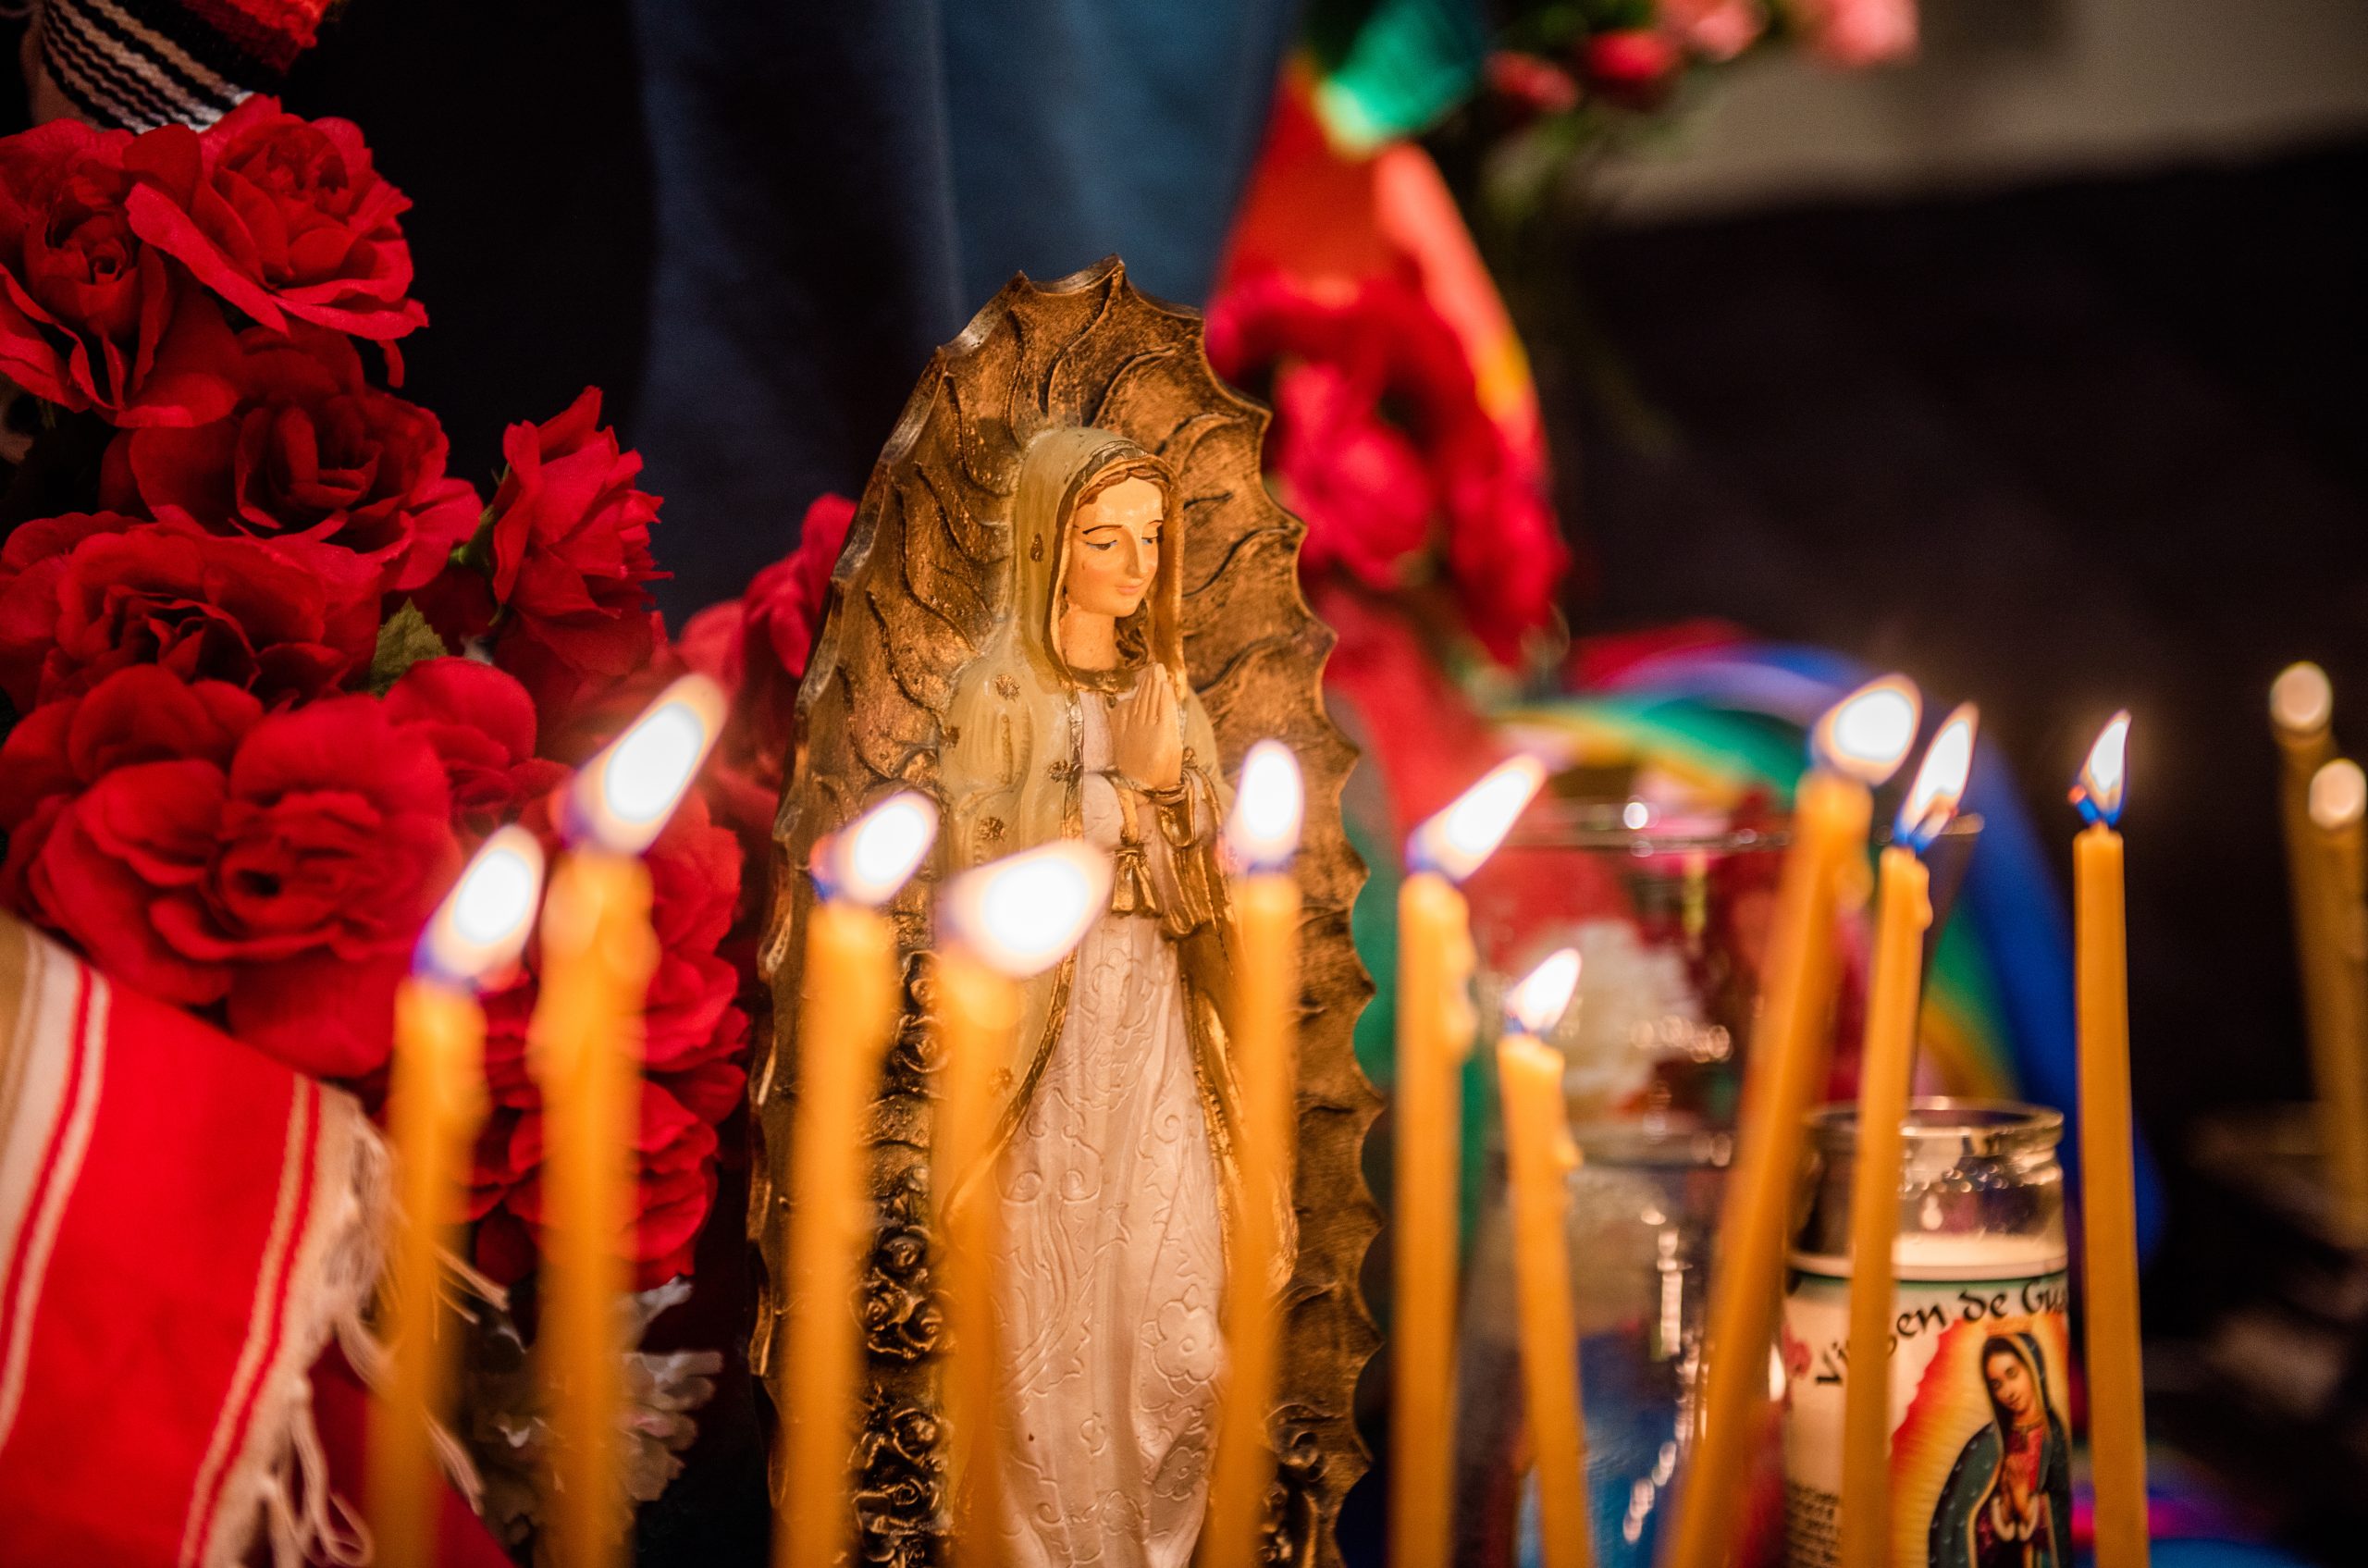 Come Celebrate the Feast of the Virgin of Guadalupe